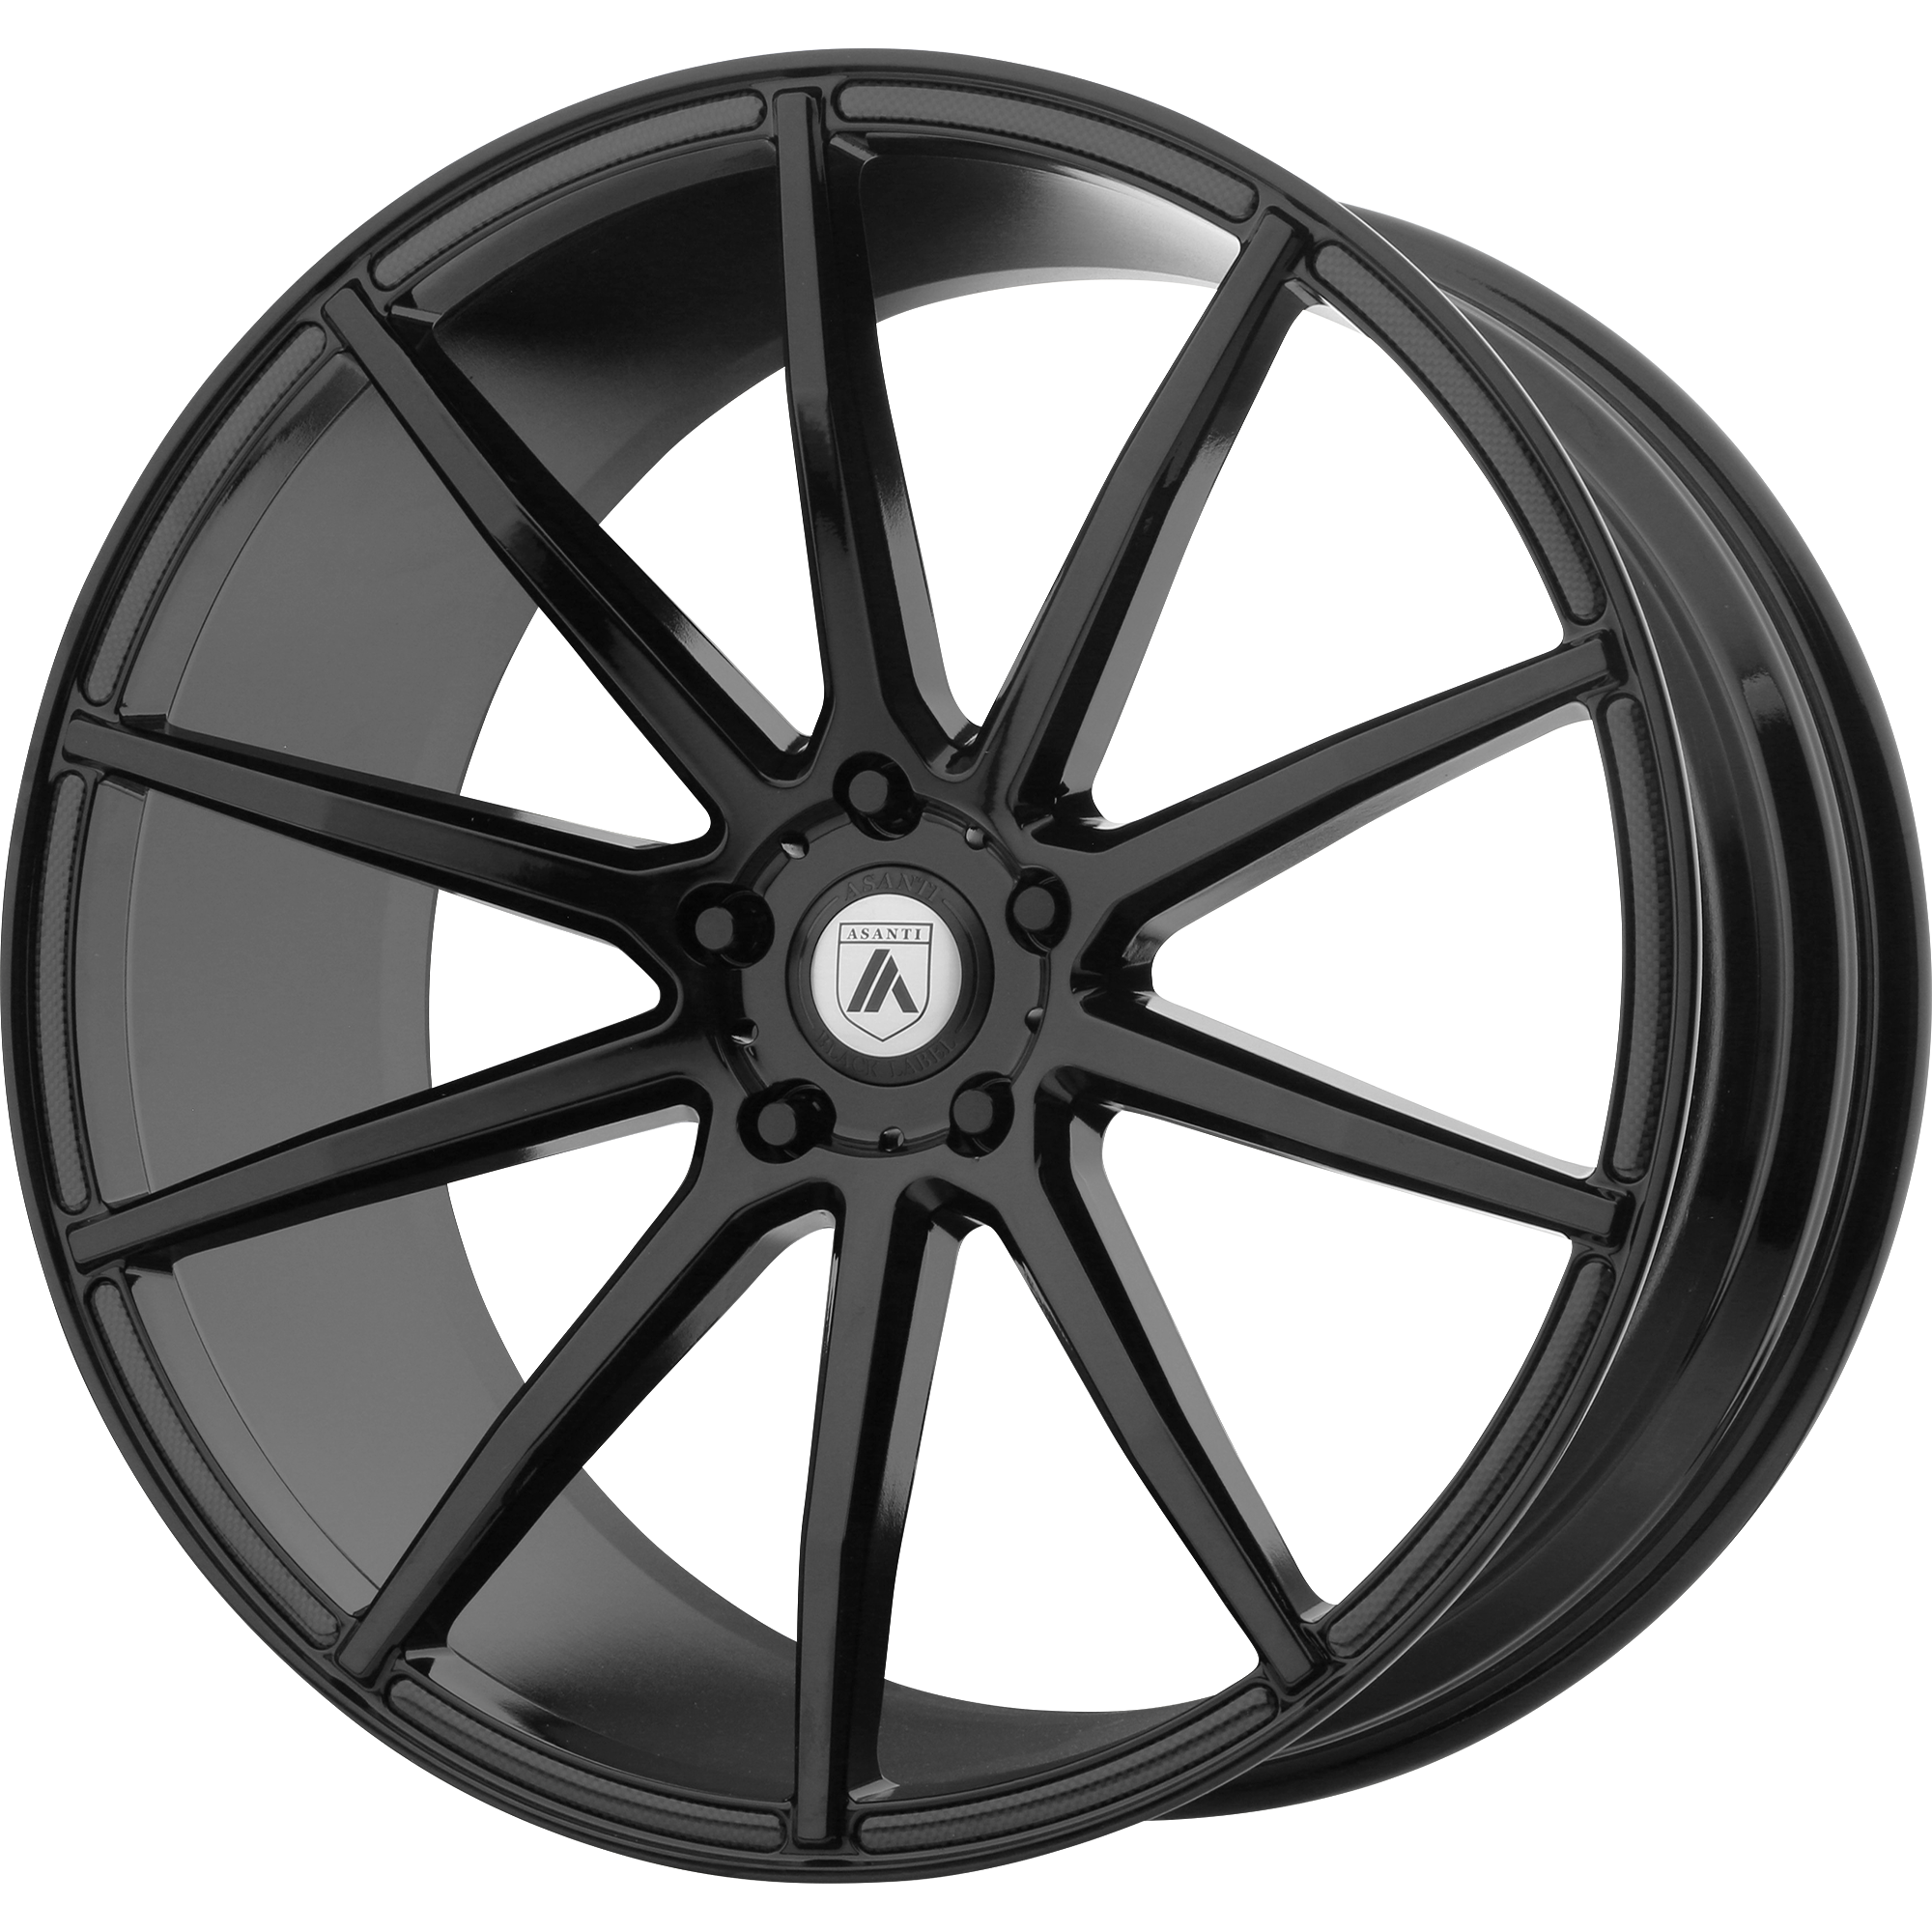 ARIES 20x8.5 5x115.00 GLOSS BLACK (20 mm) - Tires and Engine Performance